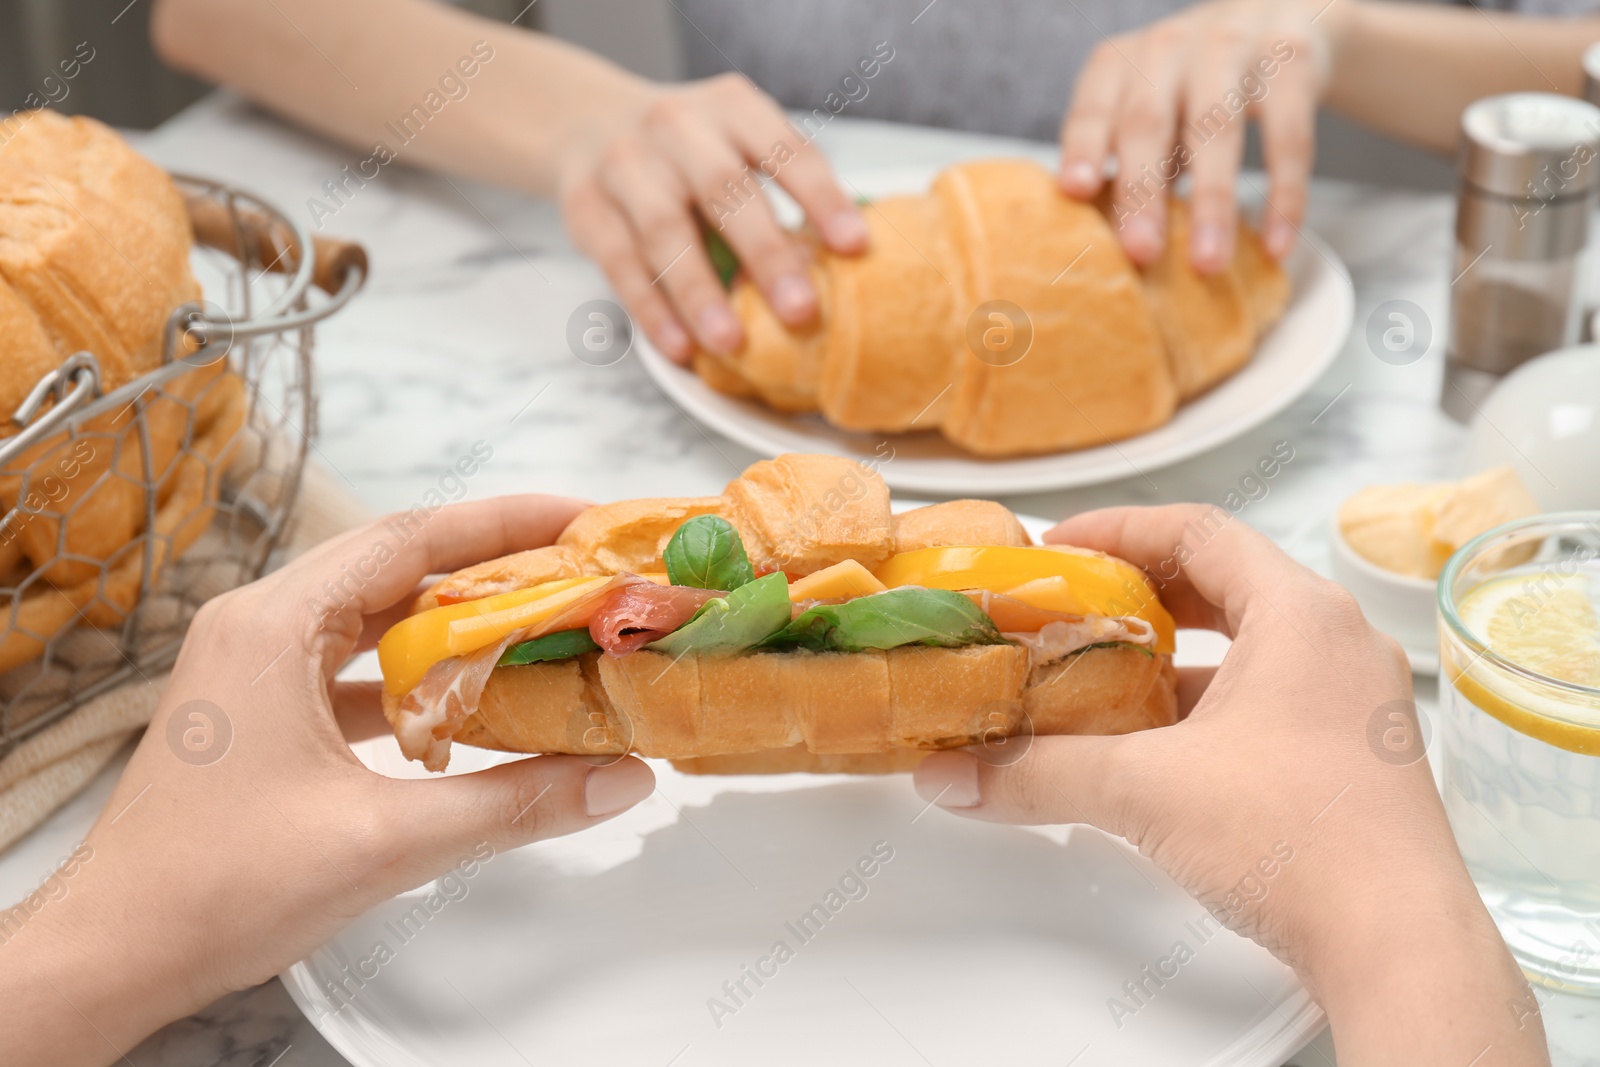 Photo of Woman holding tasty croissant sandwich over plate at table